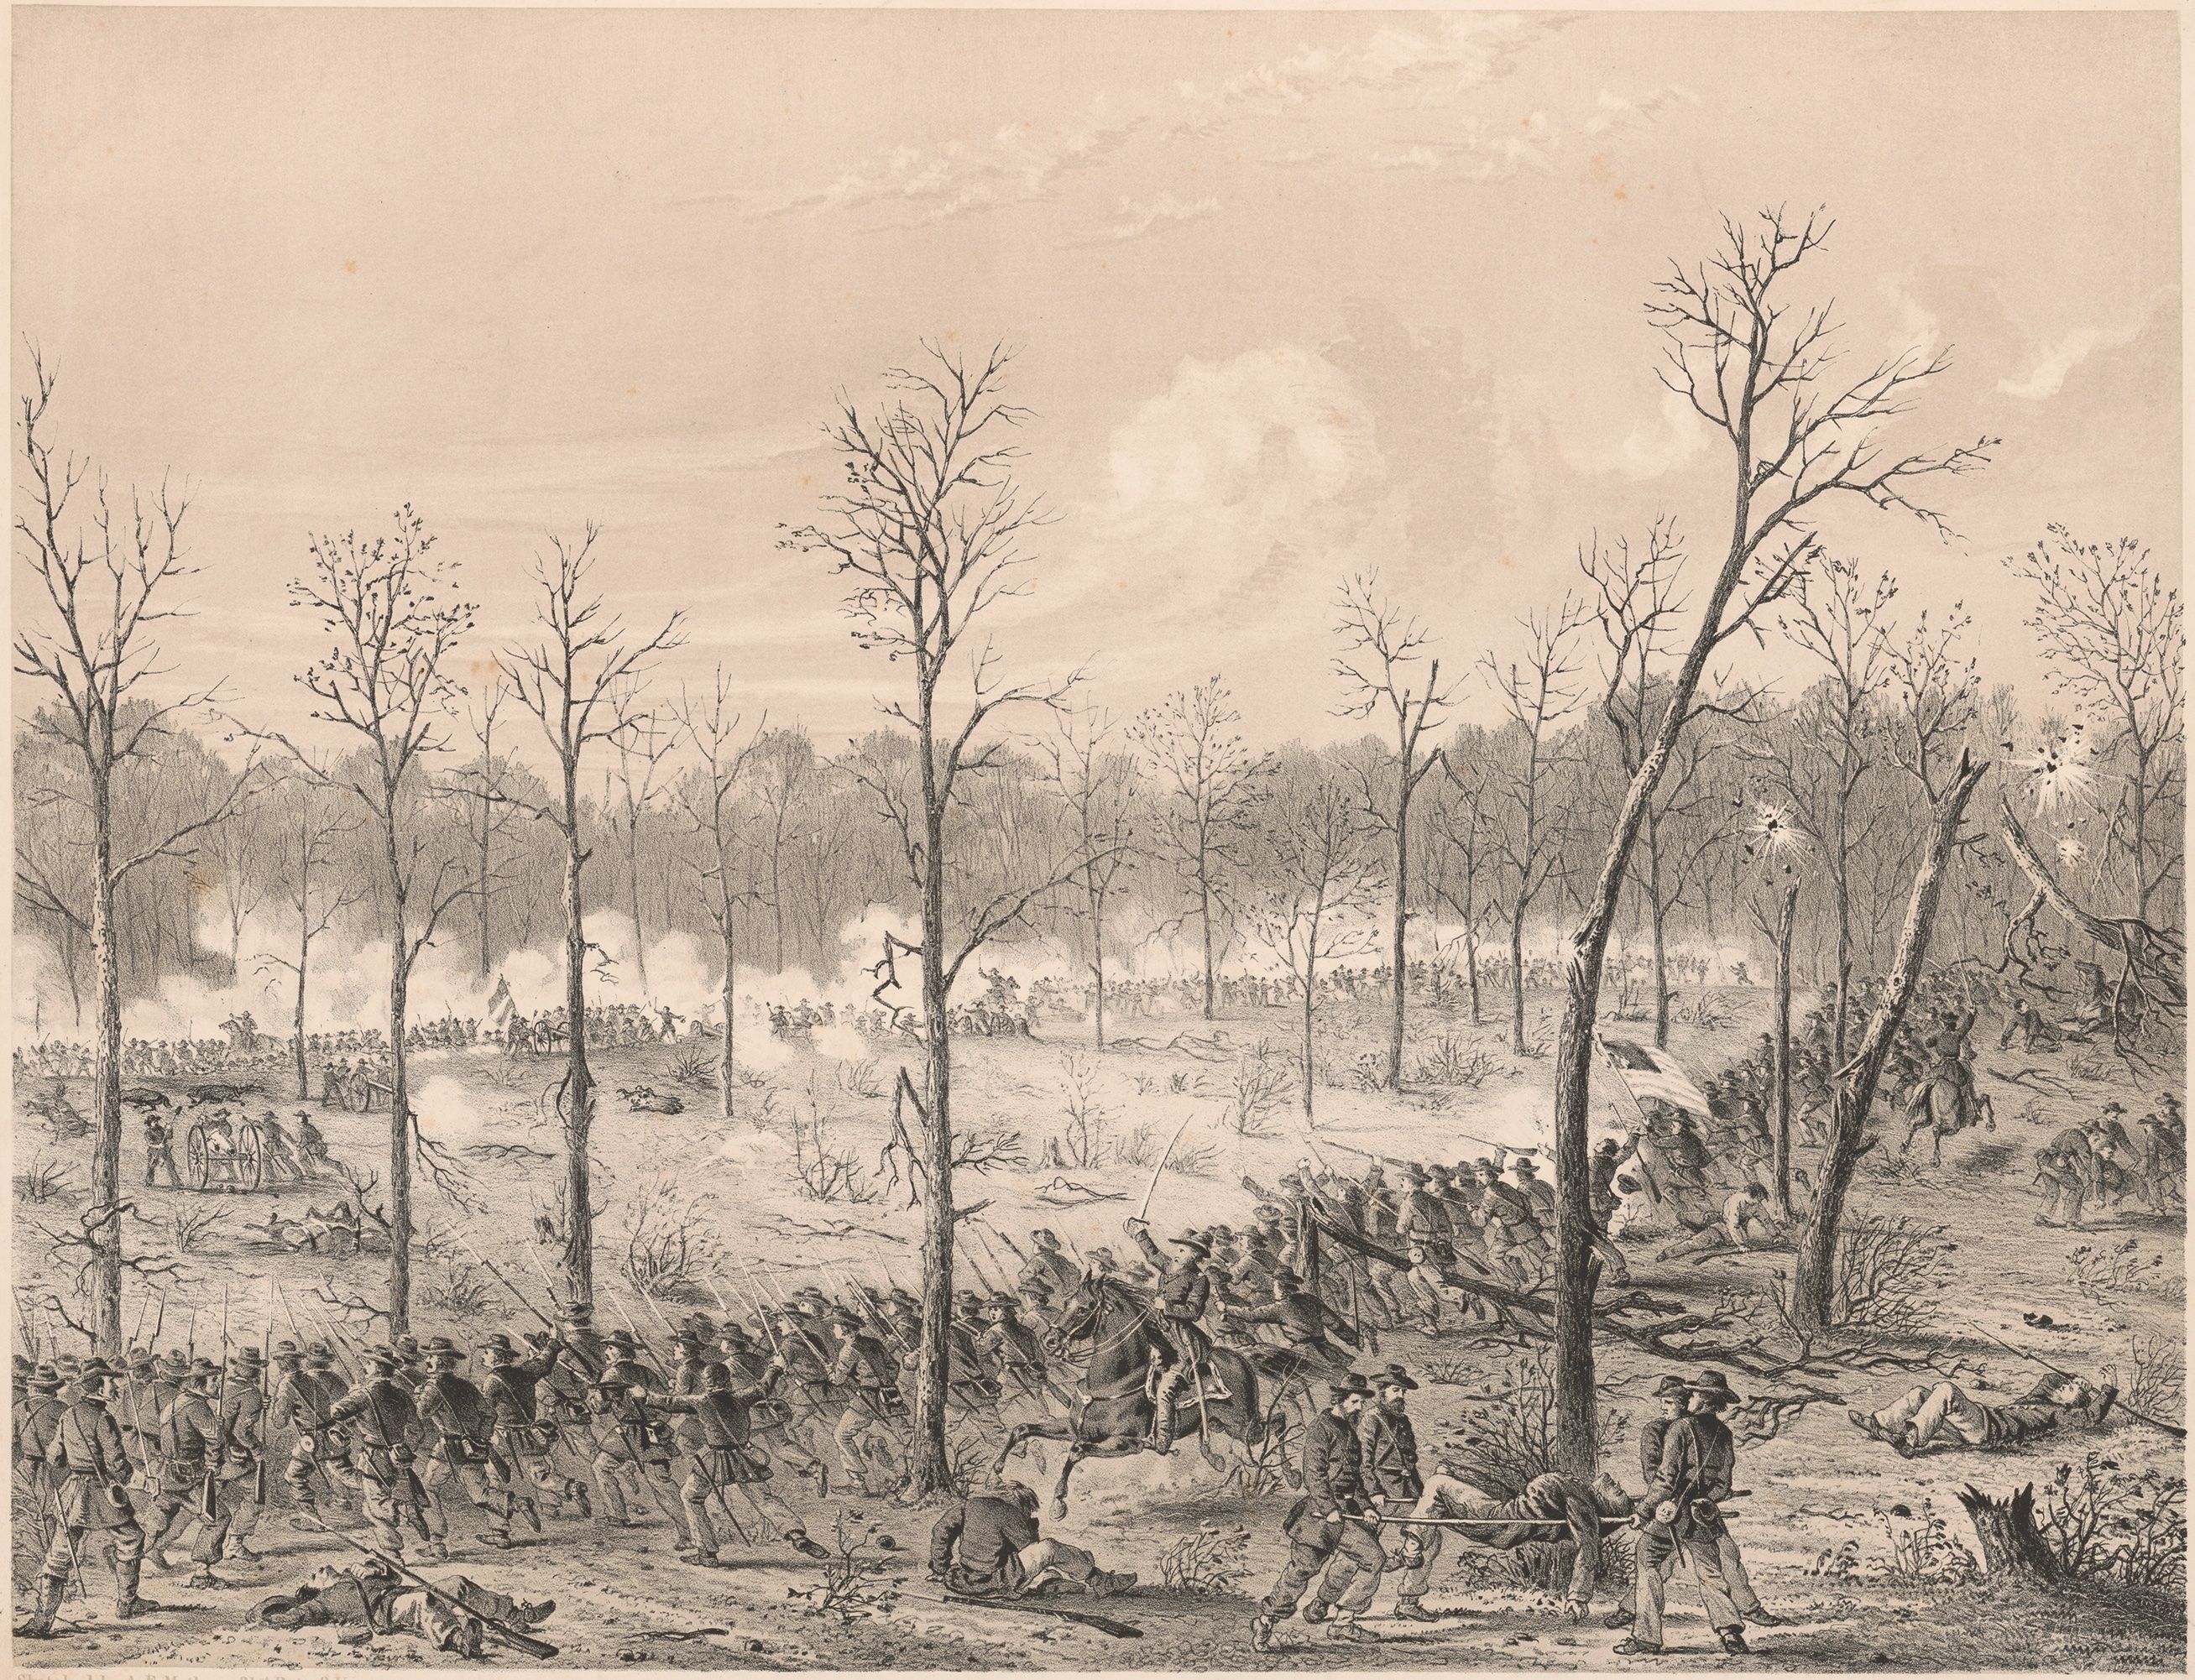 The showdown in this sketch—an attack by the 14th Wisconsin on the Washington (La.) Artillery—occurred on April 7, when Grant’s army reversed the course of the battle en route to victory. But it matched much of the close-quarters fighting that dominated the Shiloh action the previous day. (Library of Congress)